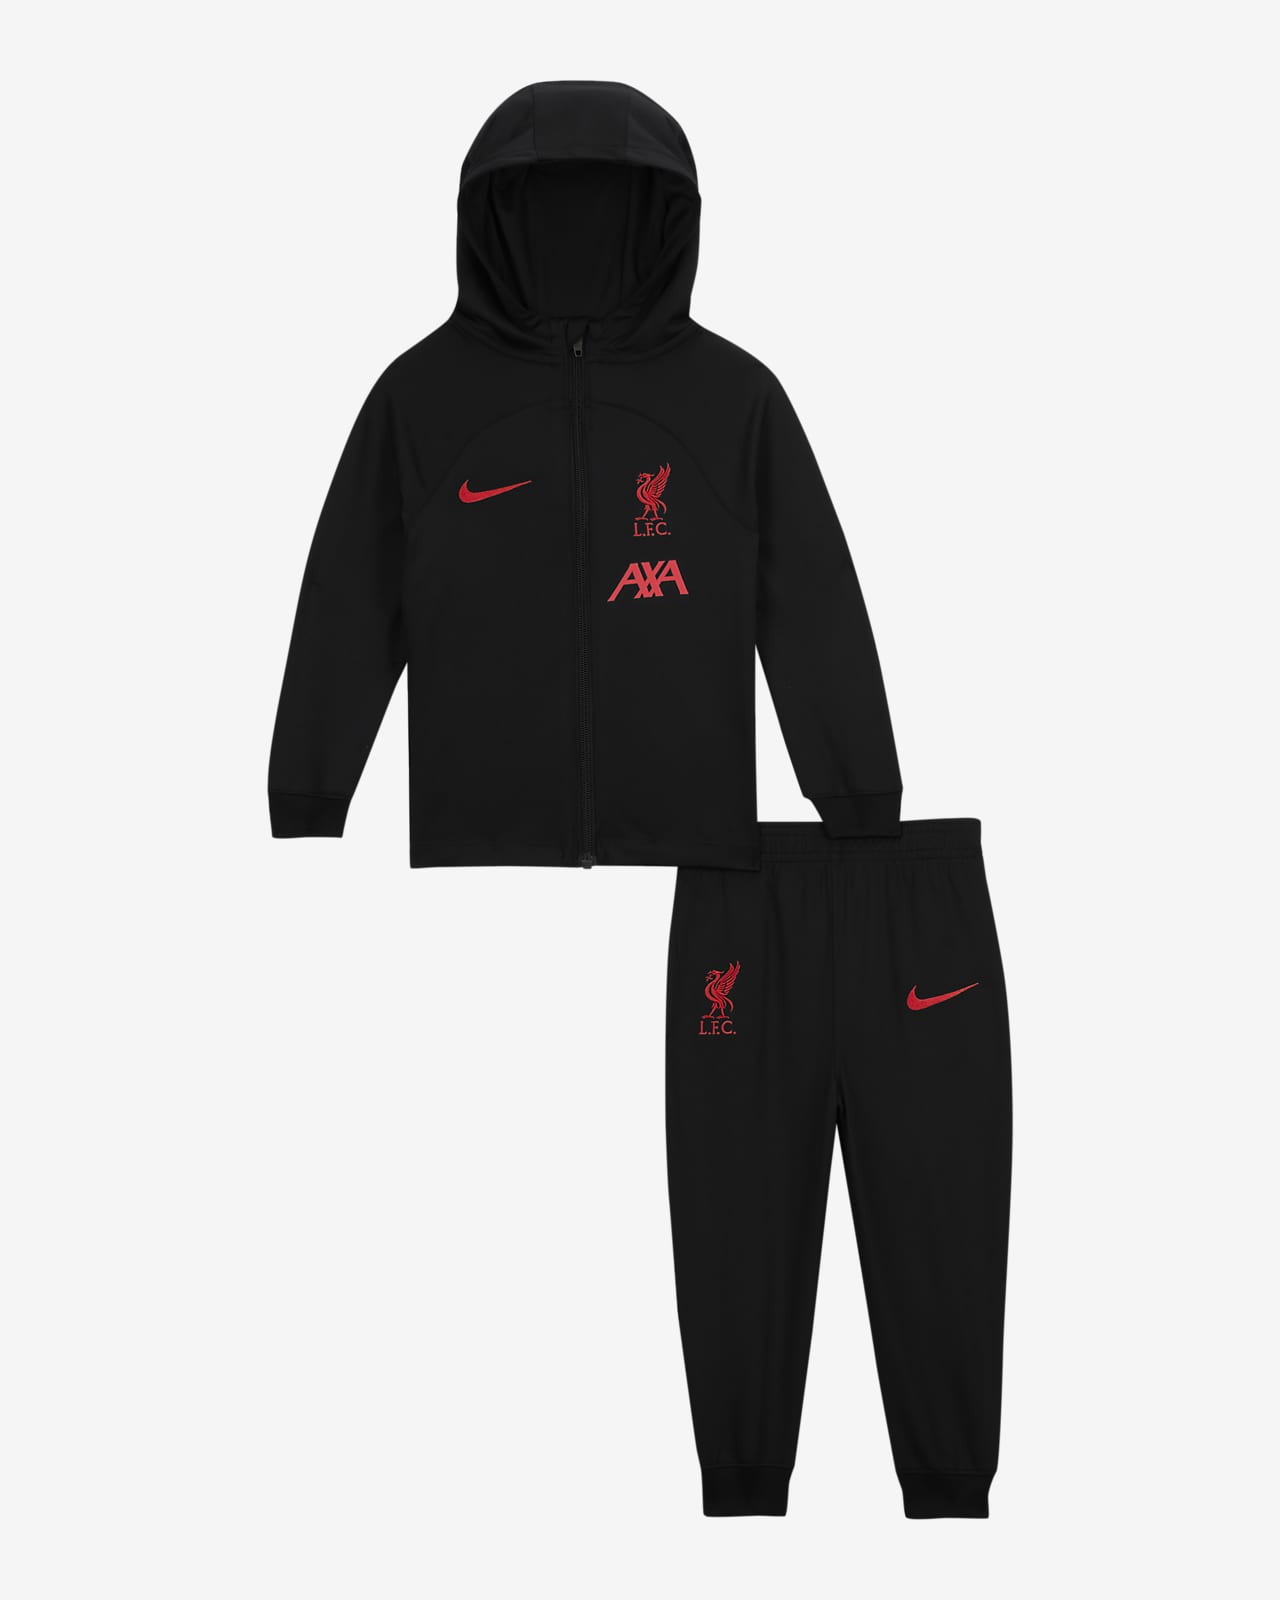 Liverpool F.C. Strike Away Baby/Toddler Nike Dri-FIT Hooded Football Tracksuit